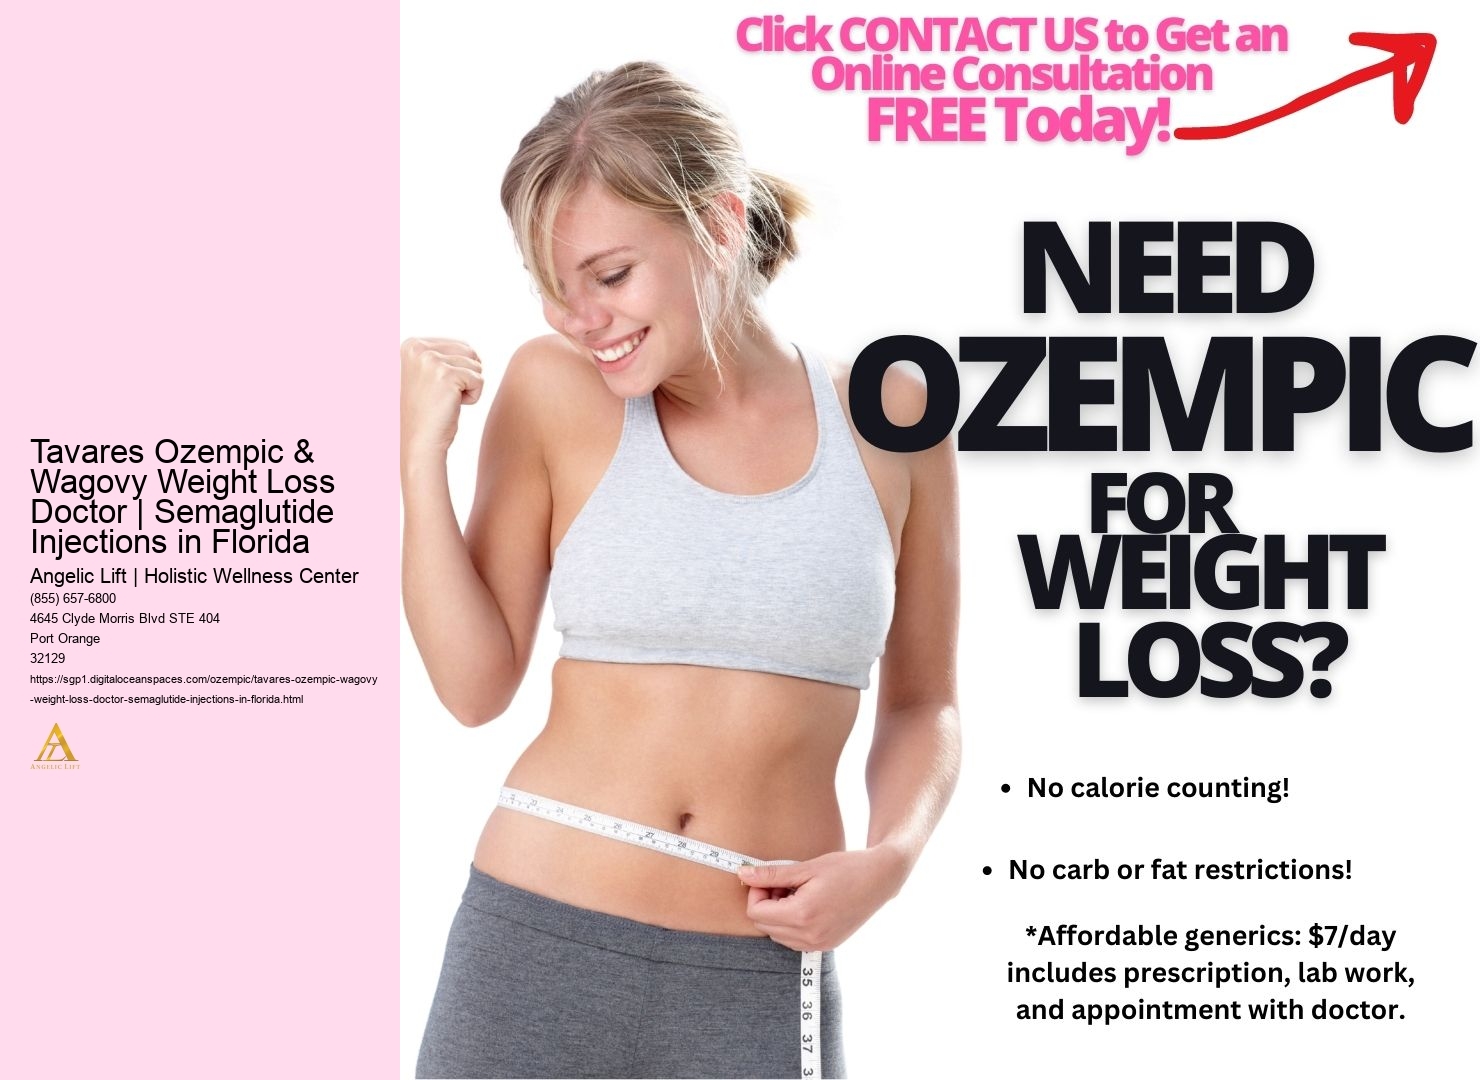 Tavares Ozempic & Wagovy Weight Loss Doctor | Semaglutide Injections in Florida